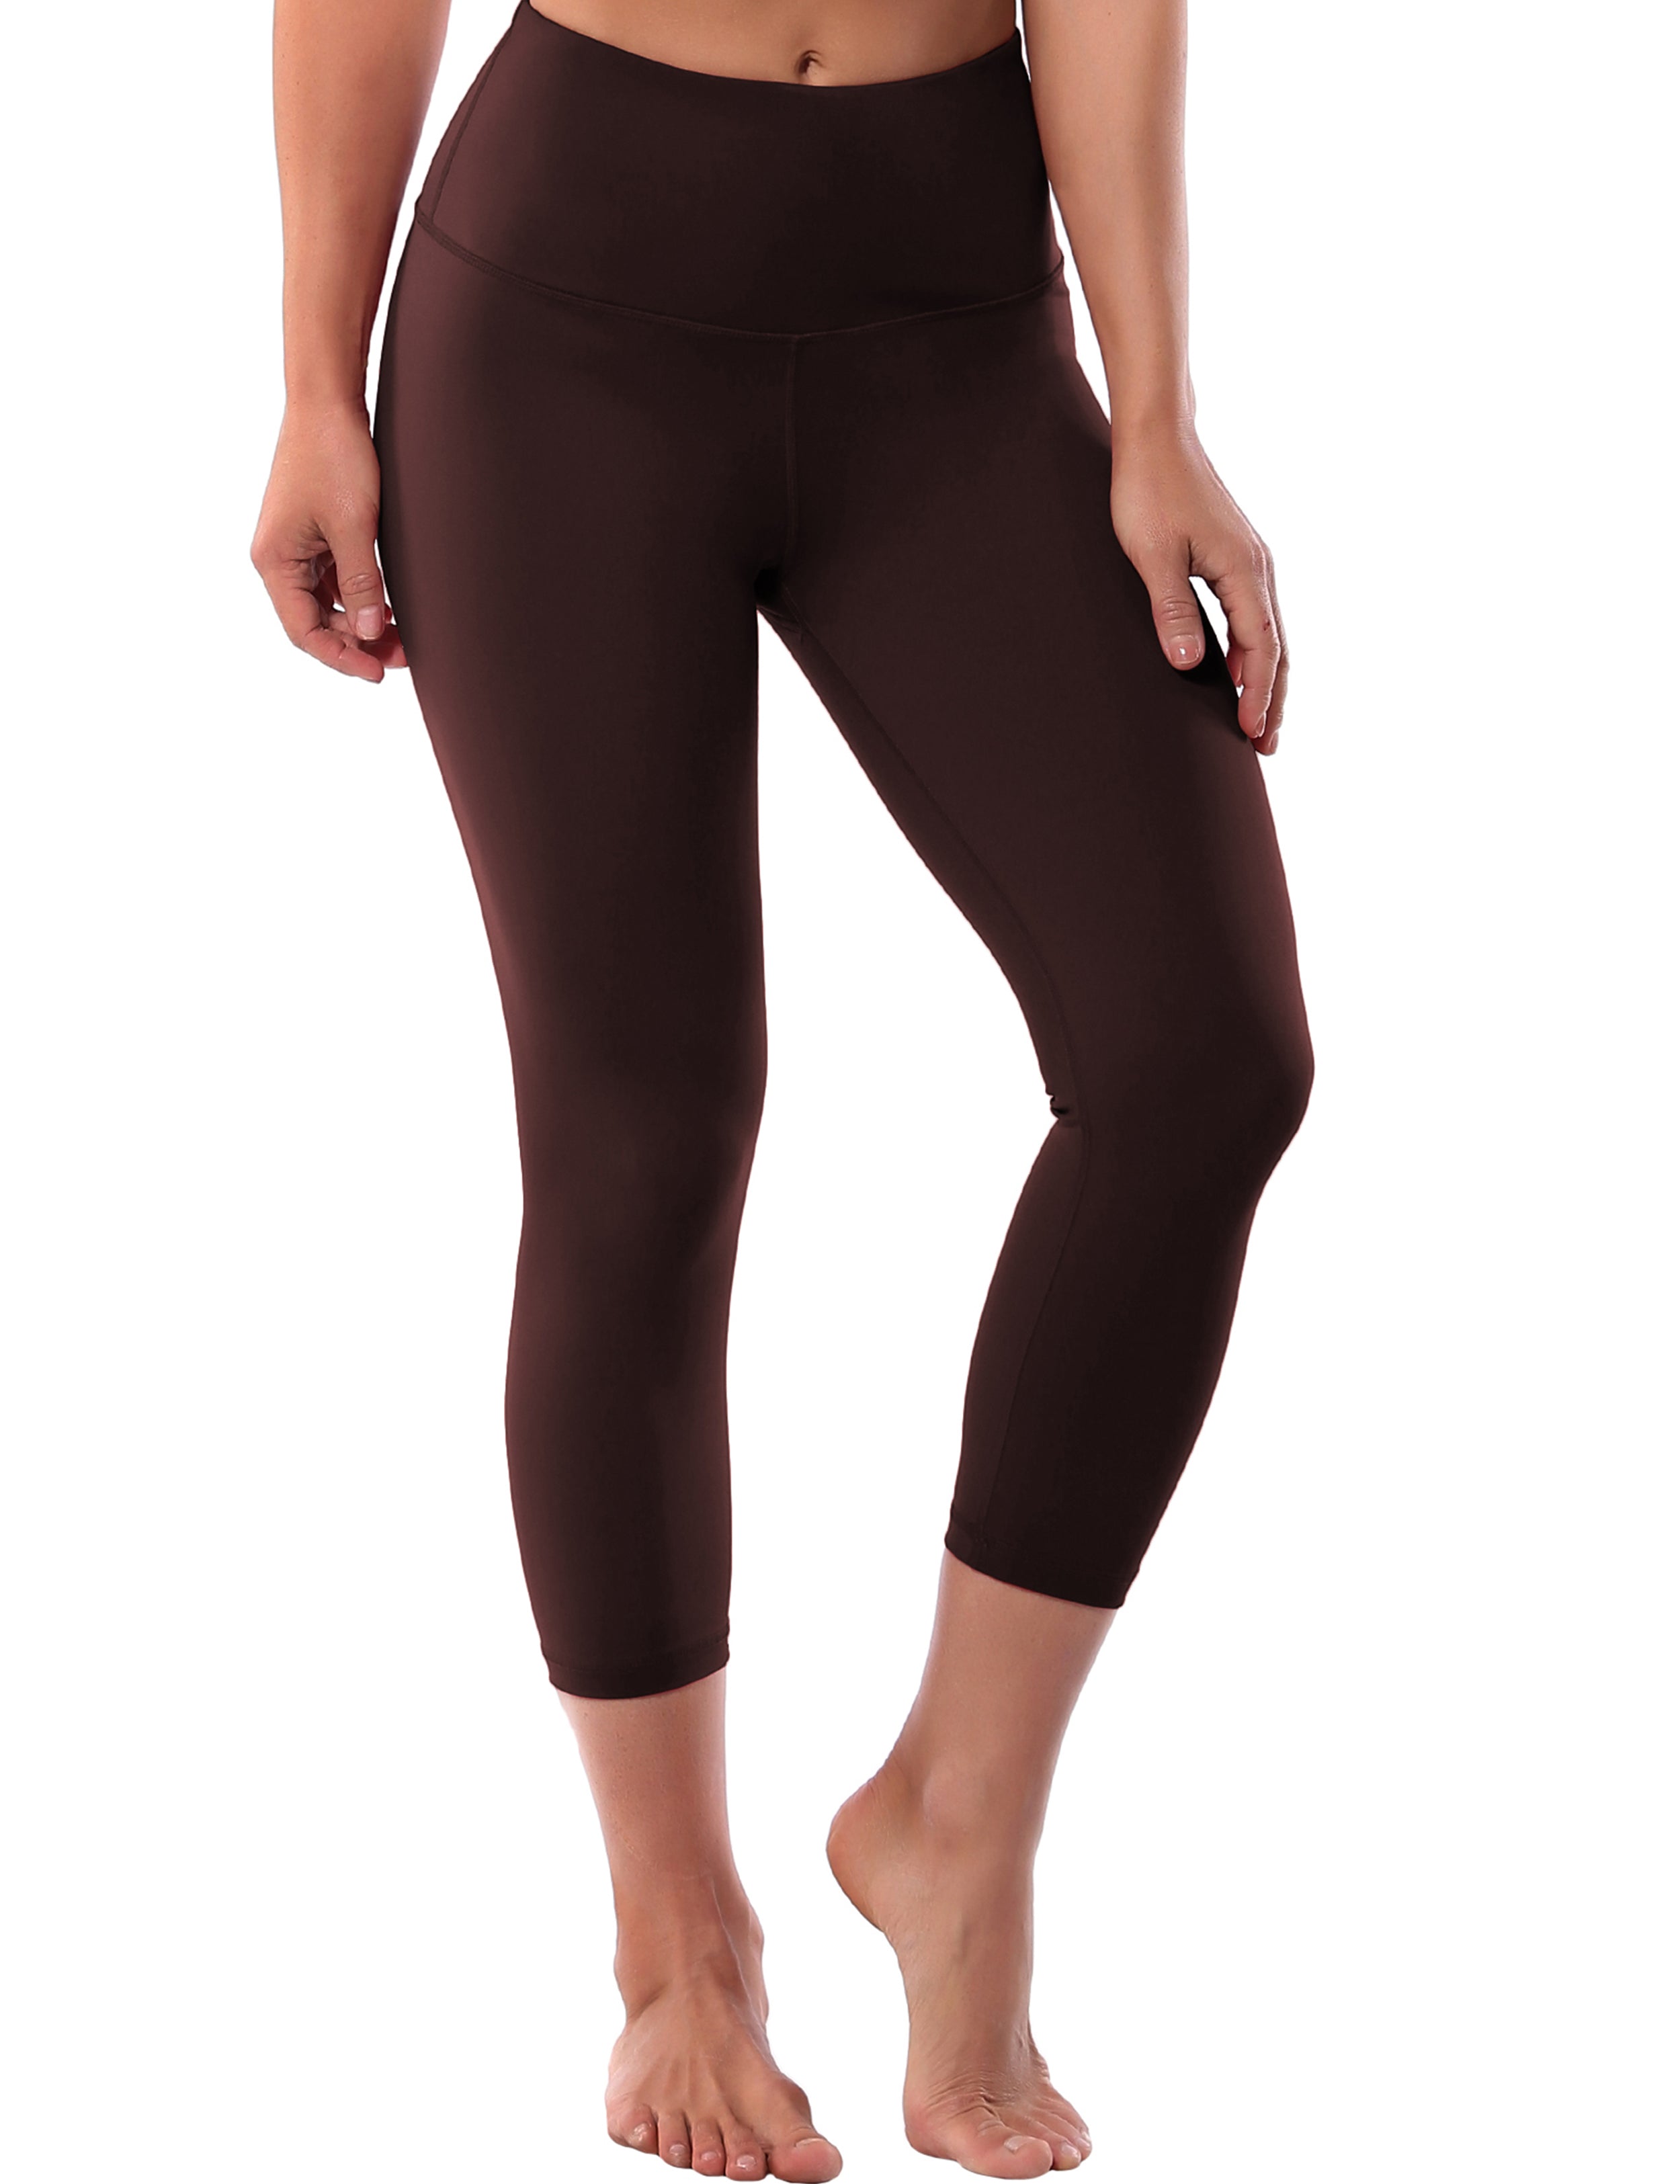 19" High Waist Crop Tight Capris mahoganymaroon 75%Nylon/25%Spandex Fabric doesn't attract lint easily 4-way stretch No see-through Moisture-wicking Tummy control Inner pocket